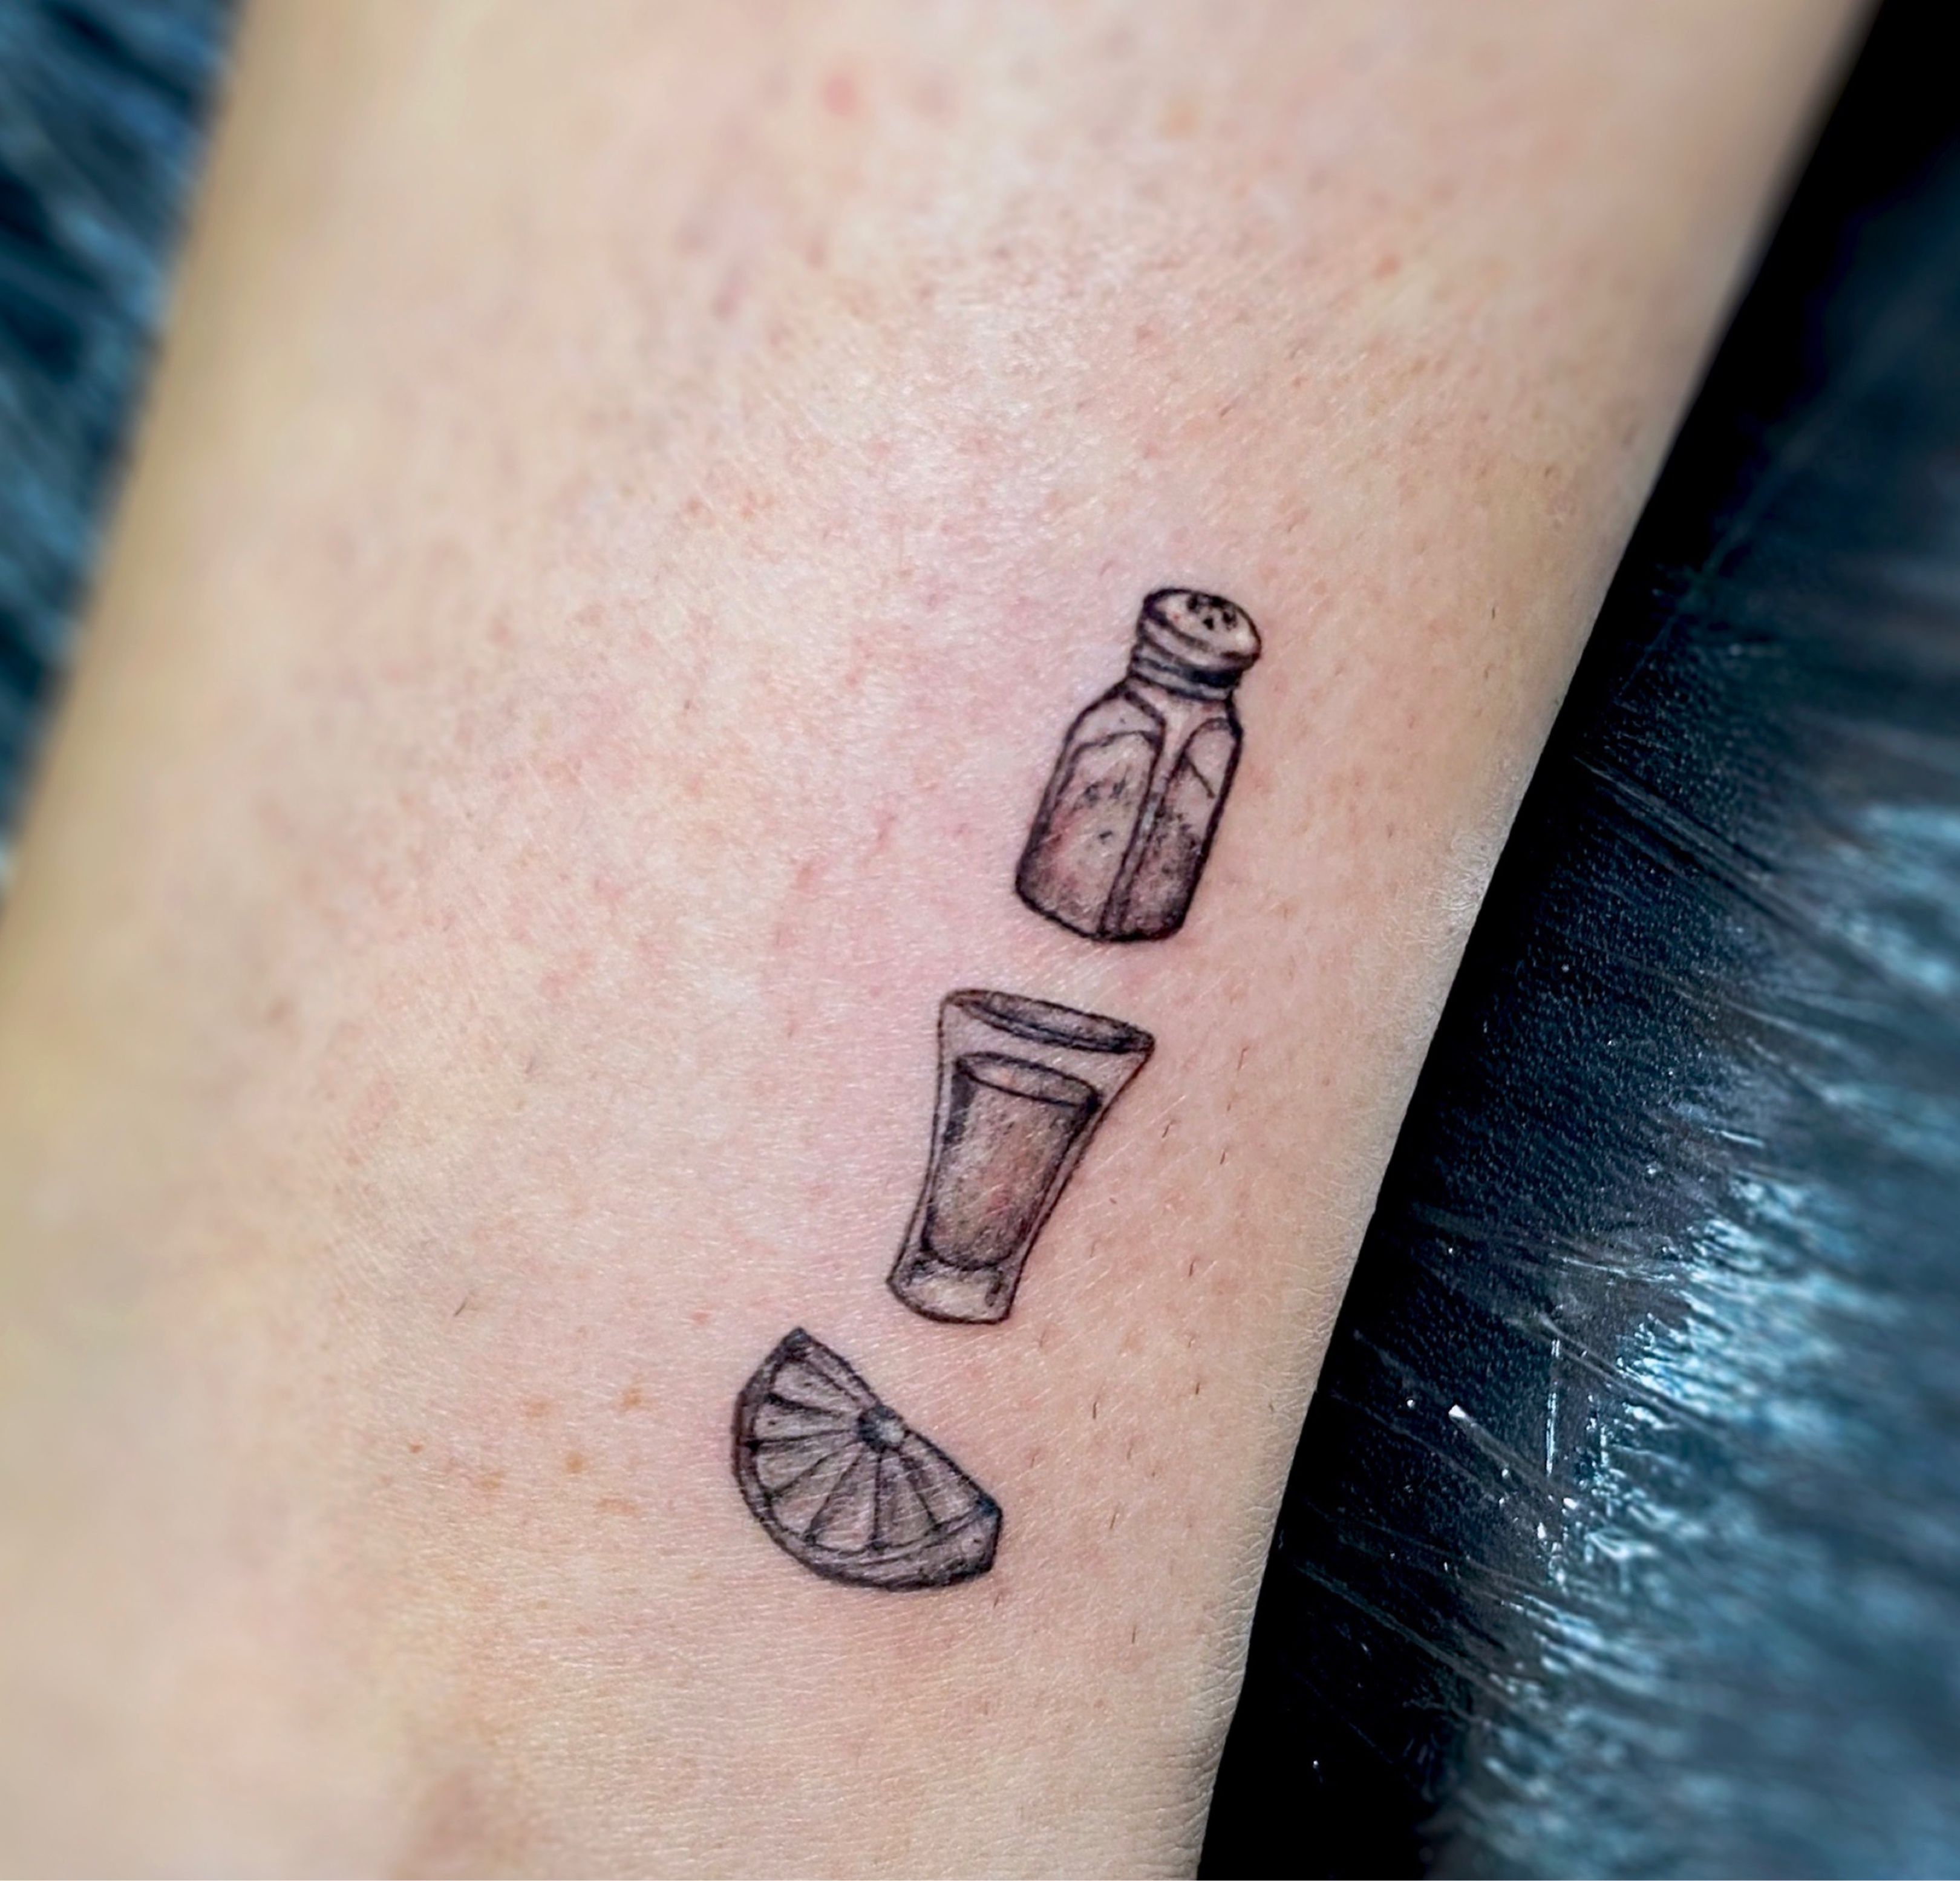 Tattoo uploaded by Kelly  Tequila is the magic water for fun people        tequilatattoos littletattoos tinytattoos microtattoo tattooideas  tequilashots tequilajalisco ankletattoos tattooexplore explorepage  cutetattoos worldfamousink 